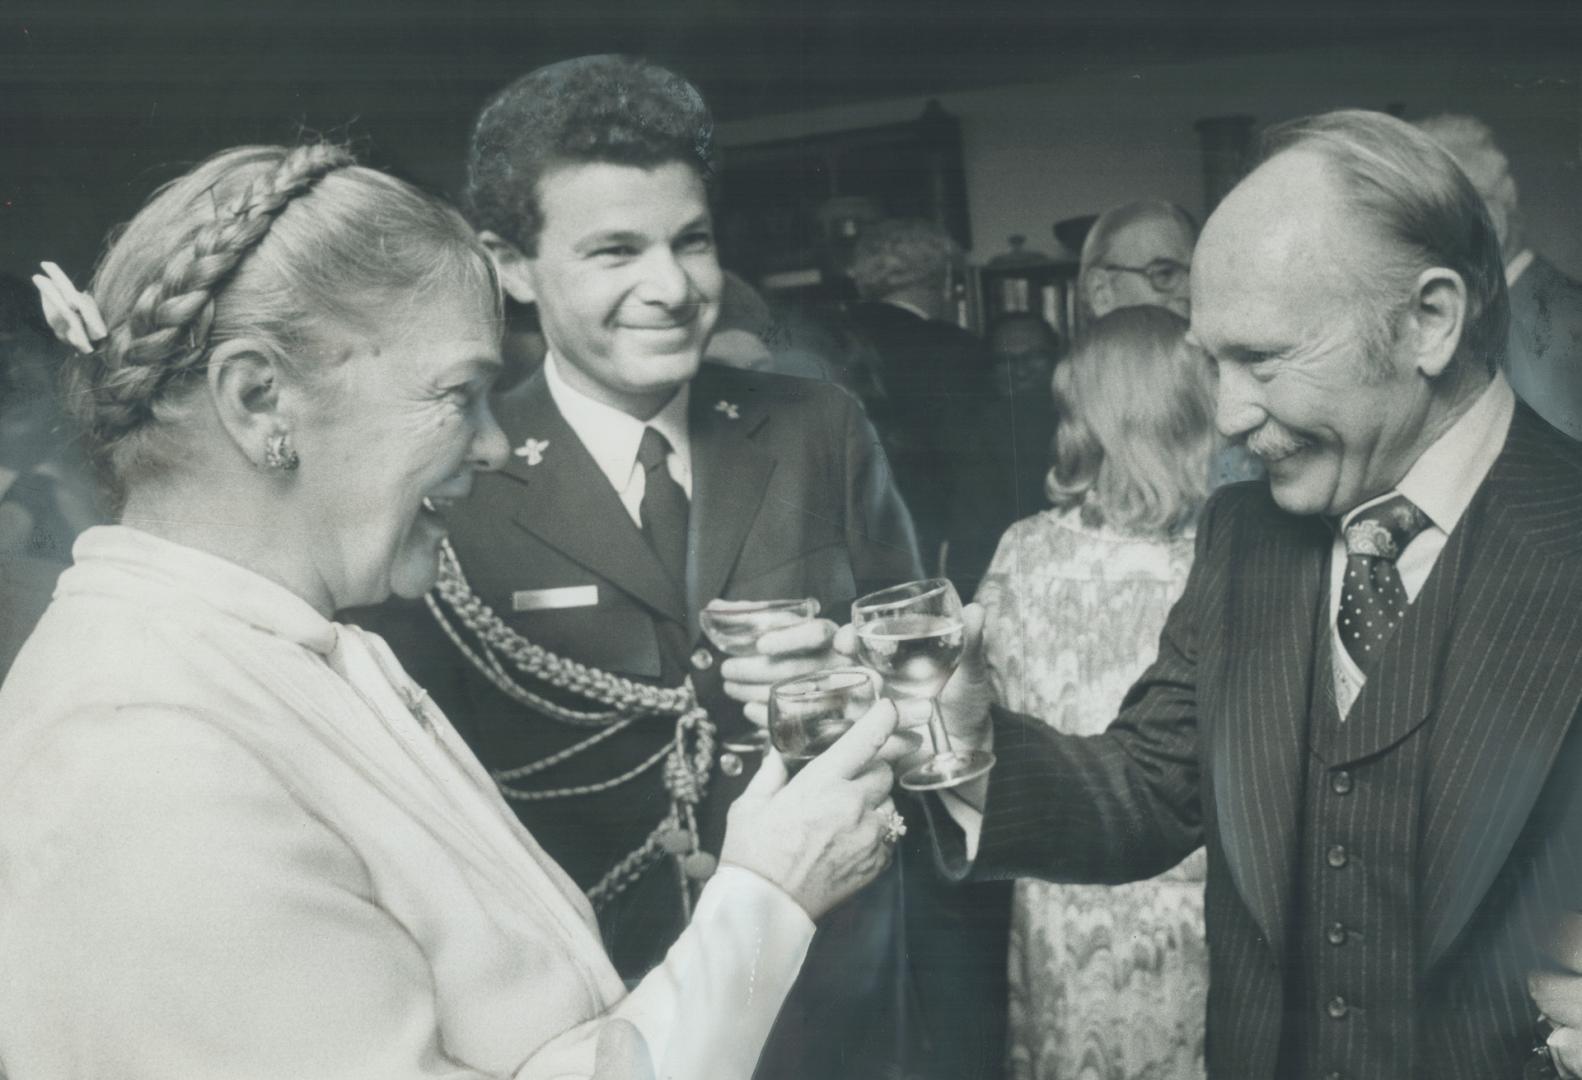 7 P.M. At a cocktail party in Toronto, Pauline McGibbon joins Israeli Consul General Shmuel Ovnat, right, and Lt. D. A. Rubin, in a toast to 28th anni(...)